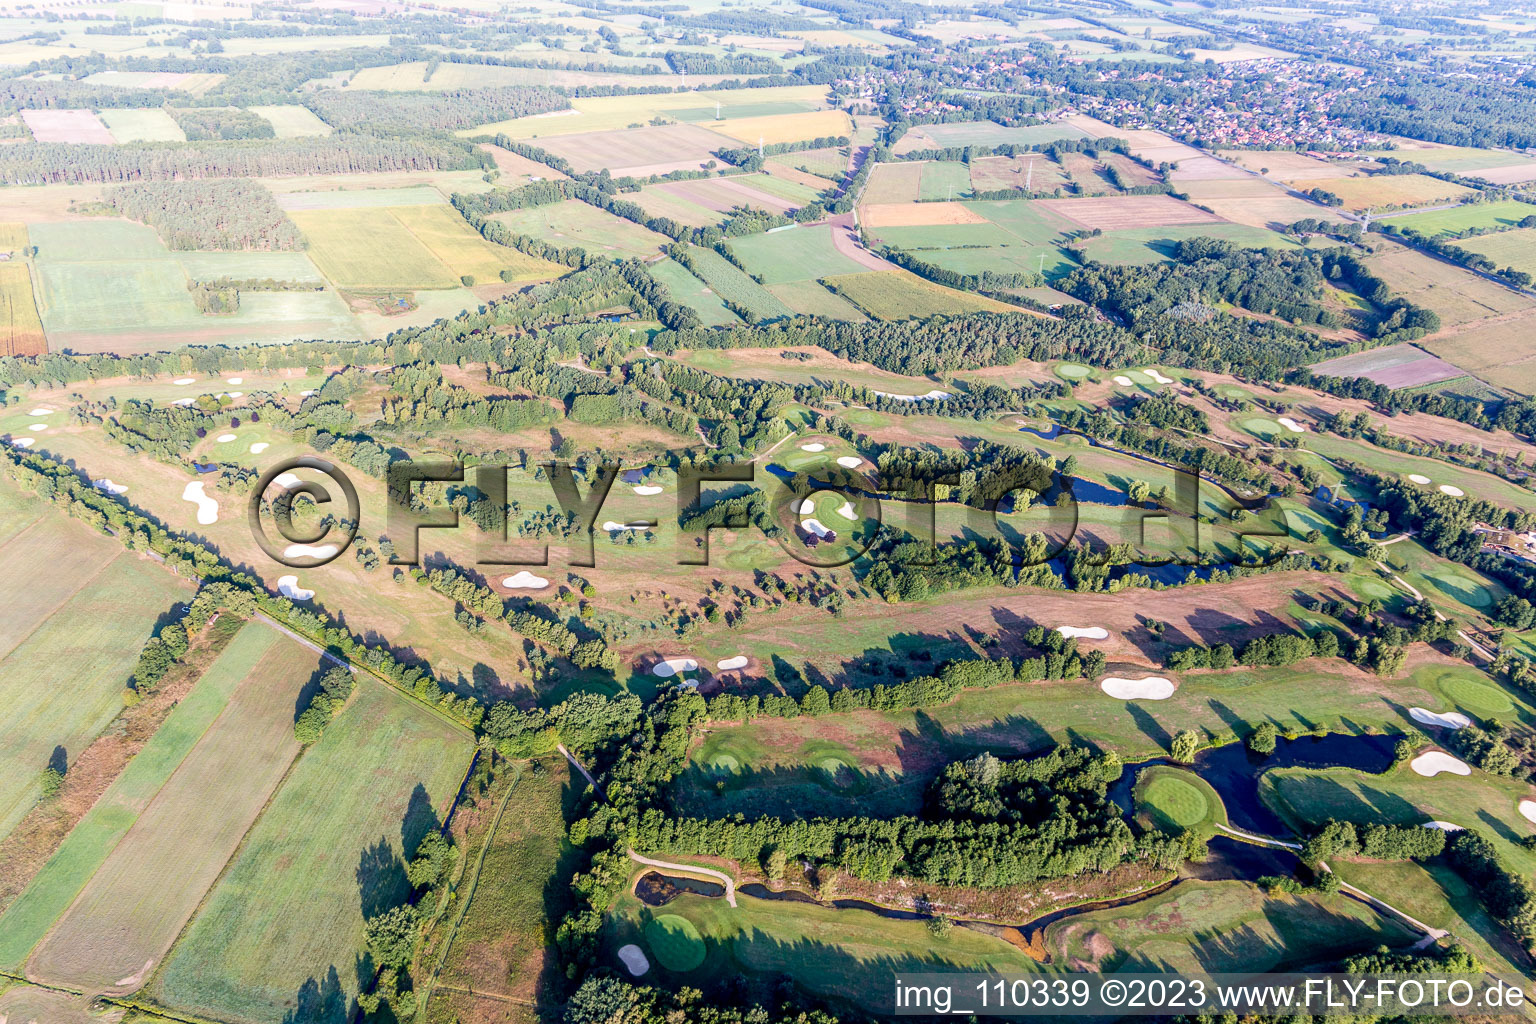 Grounds of the Golf course at Green Eagle Golf Courses in Winsen (Luhe) in the state Lower Saxony, Germany viewn from the air